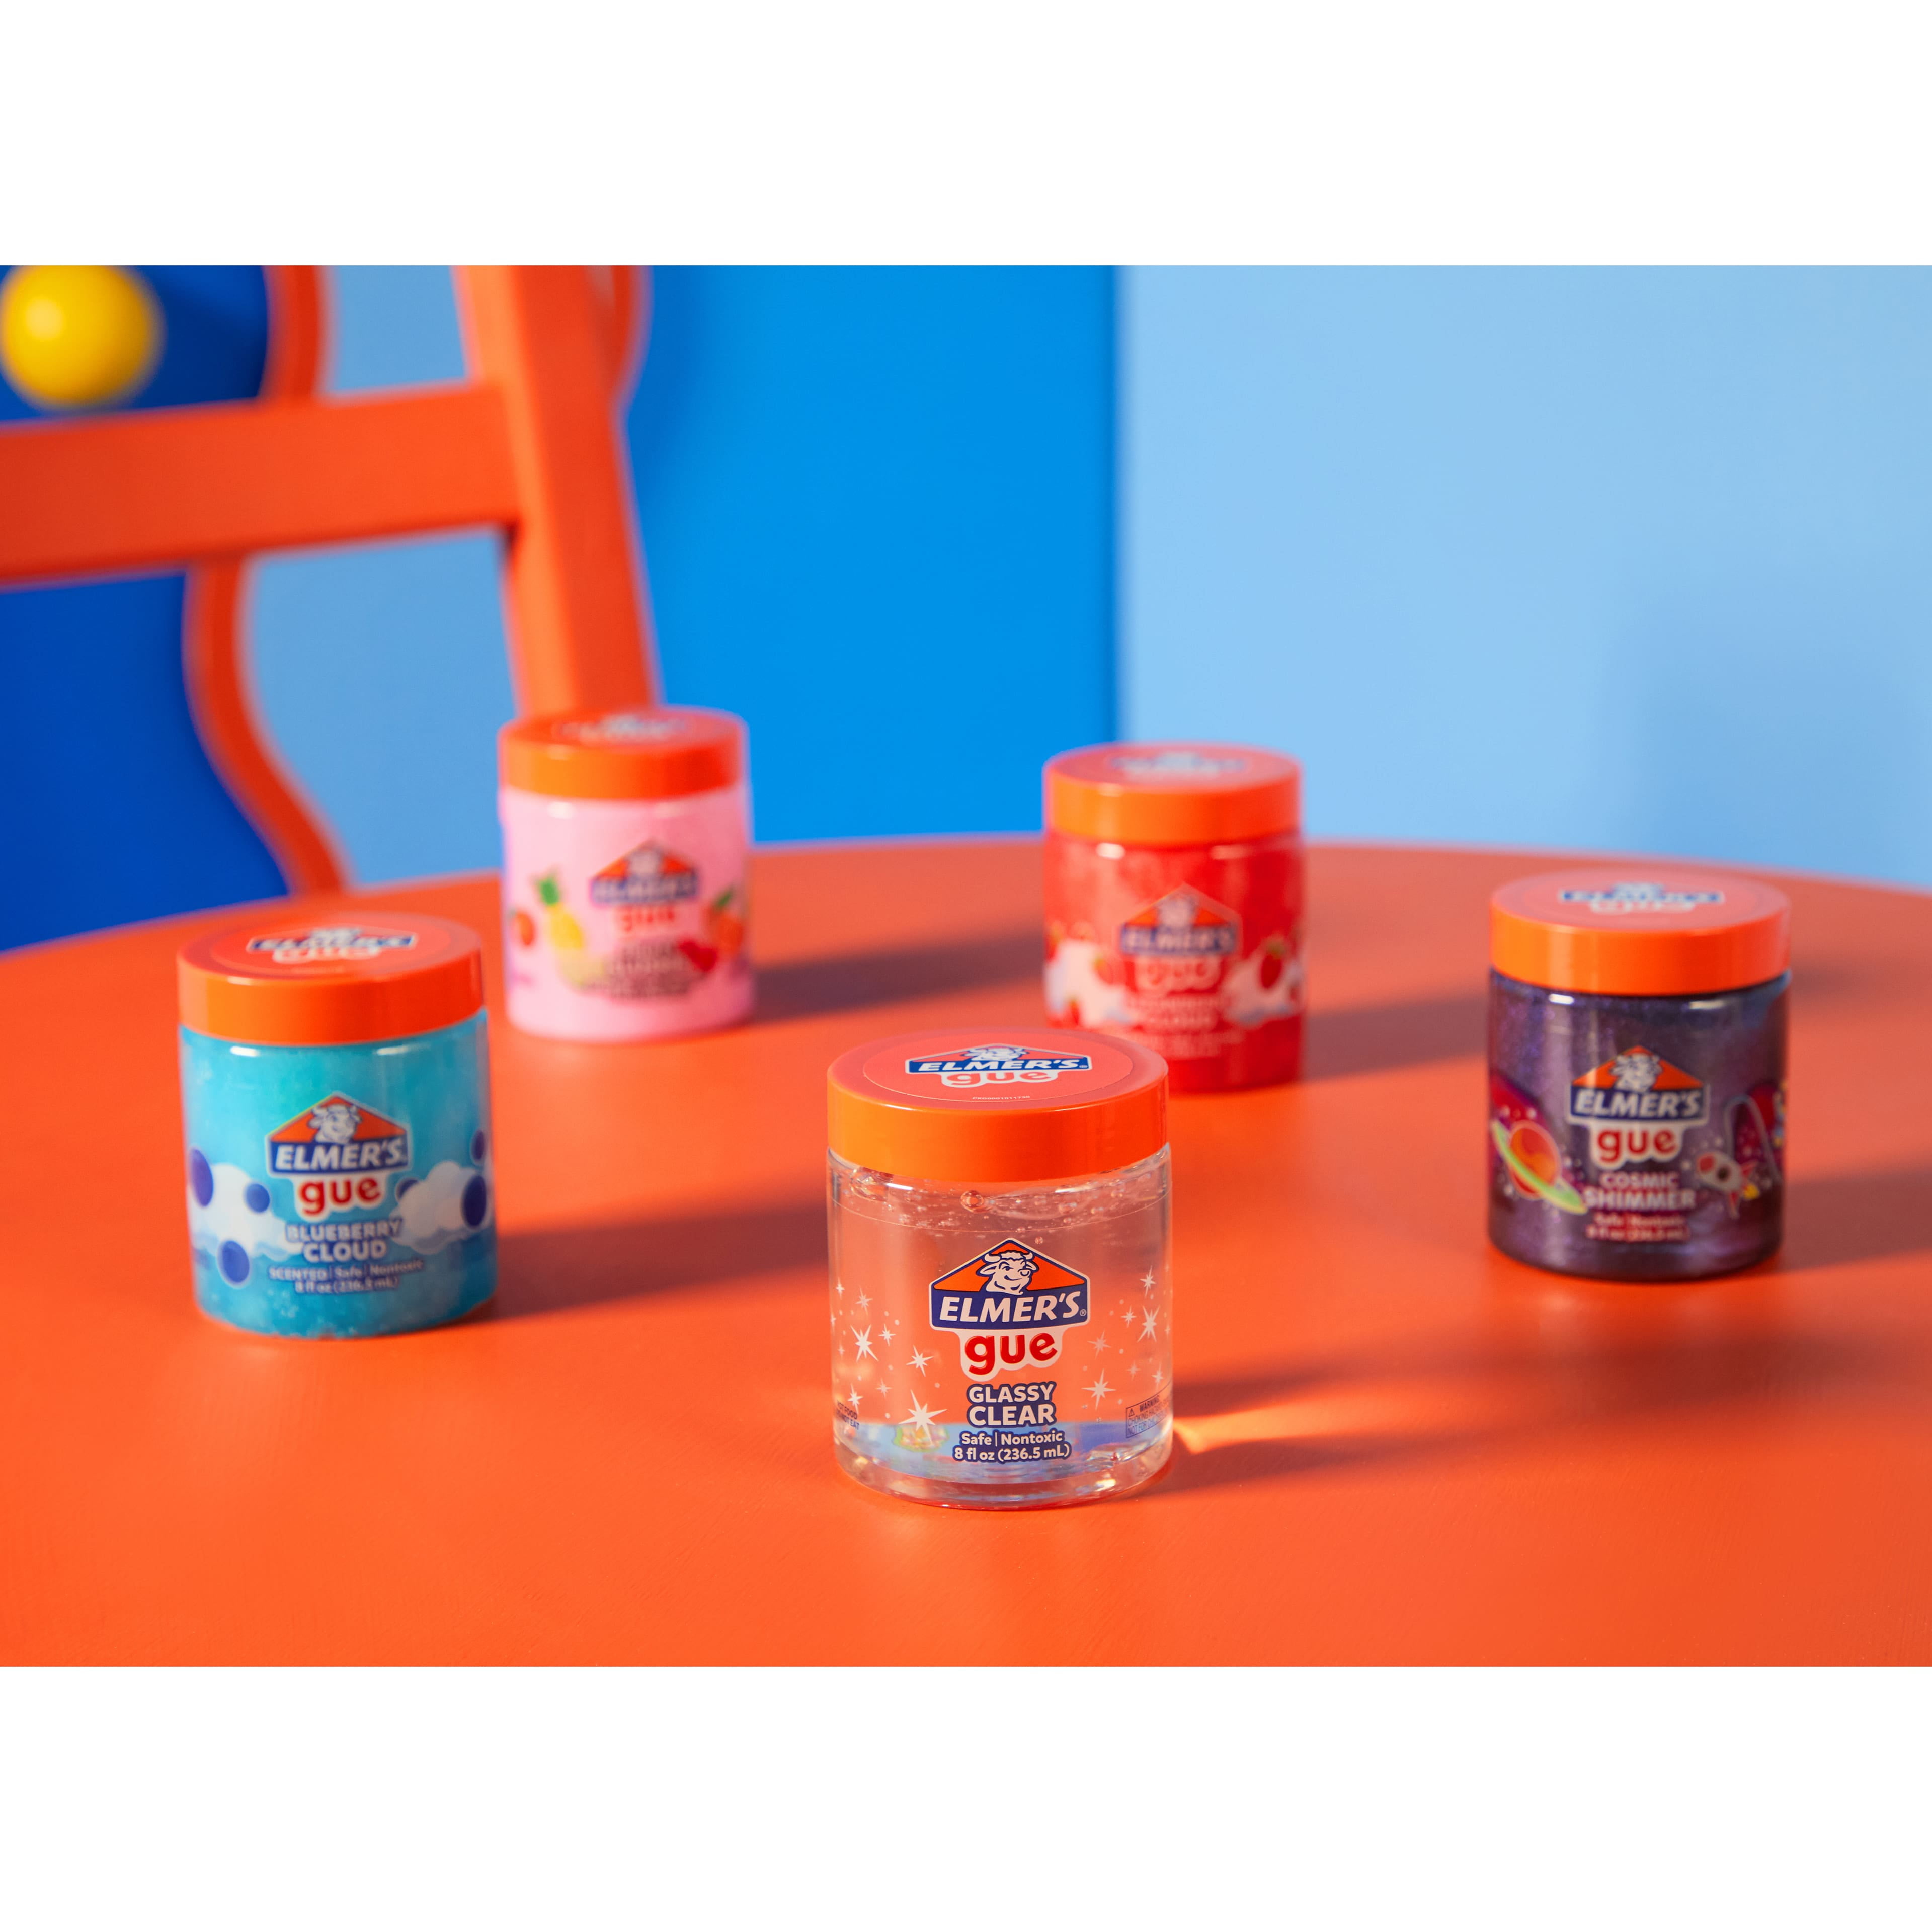 Elmer's® Gue Glassy Clear Deluxe Premade Slime with Mix-Ins